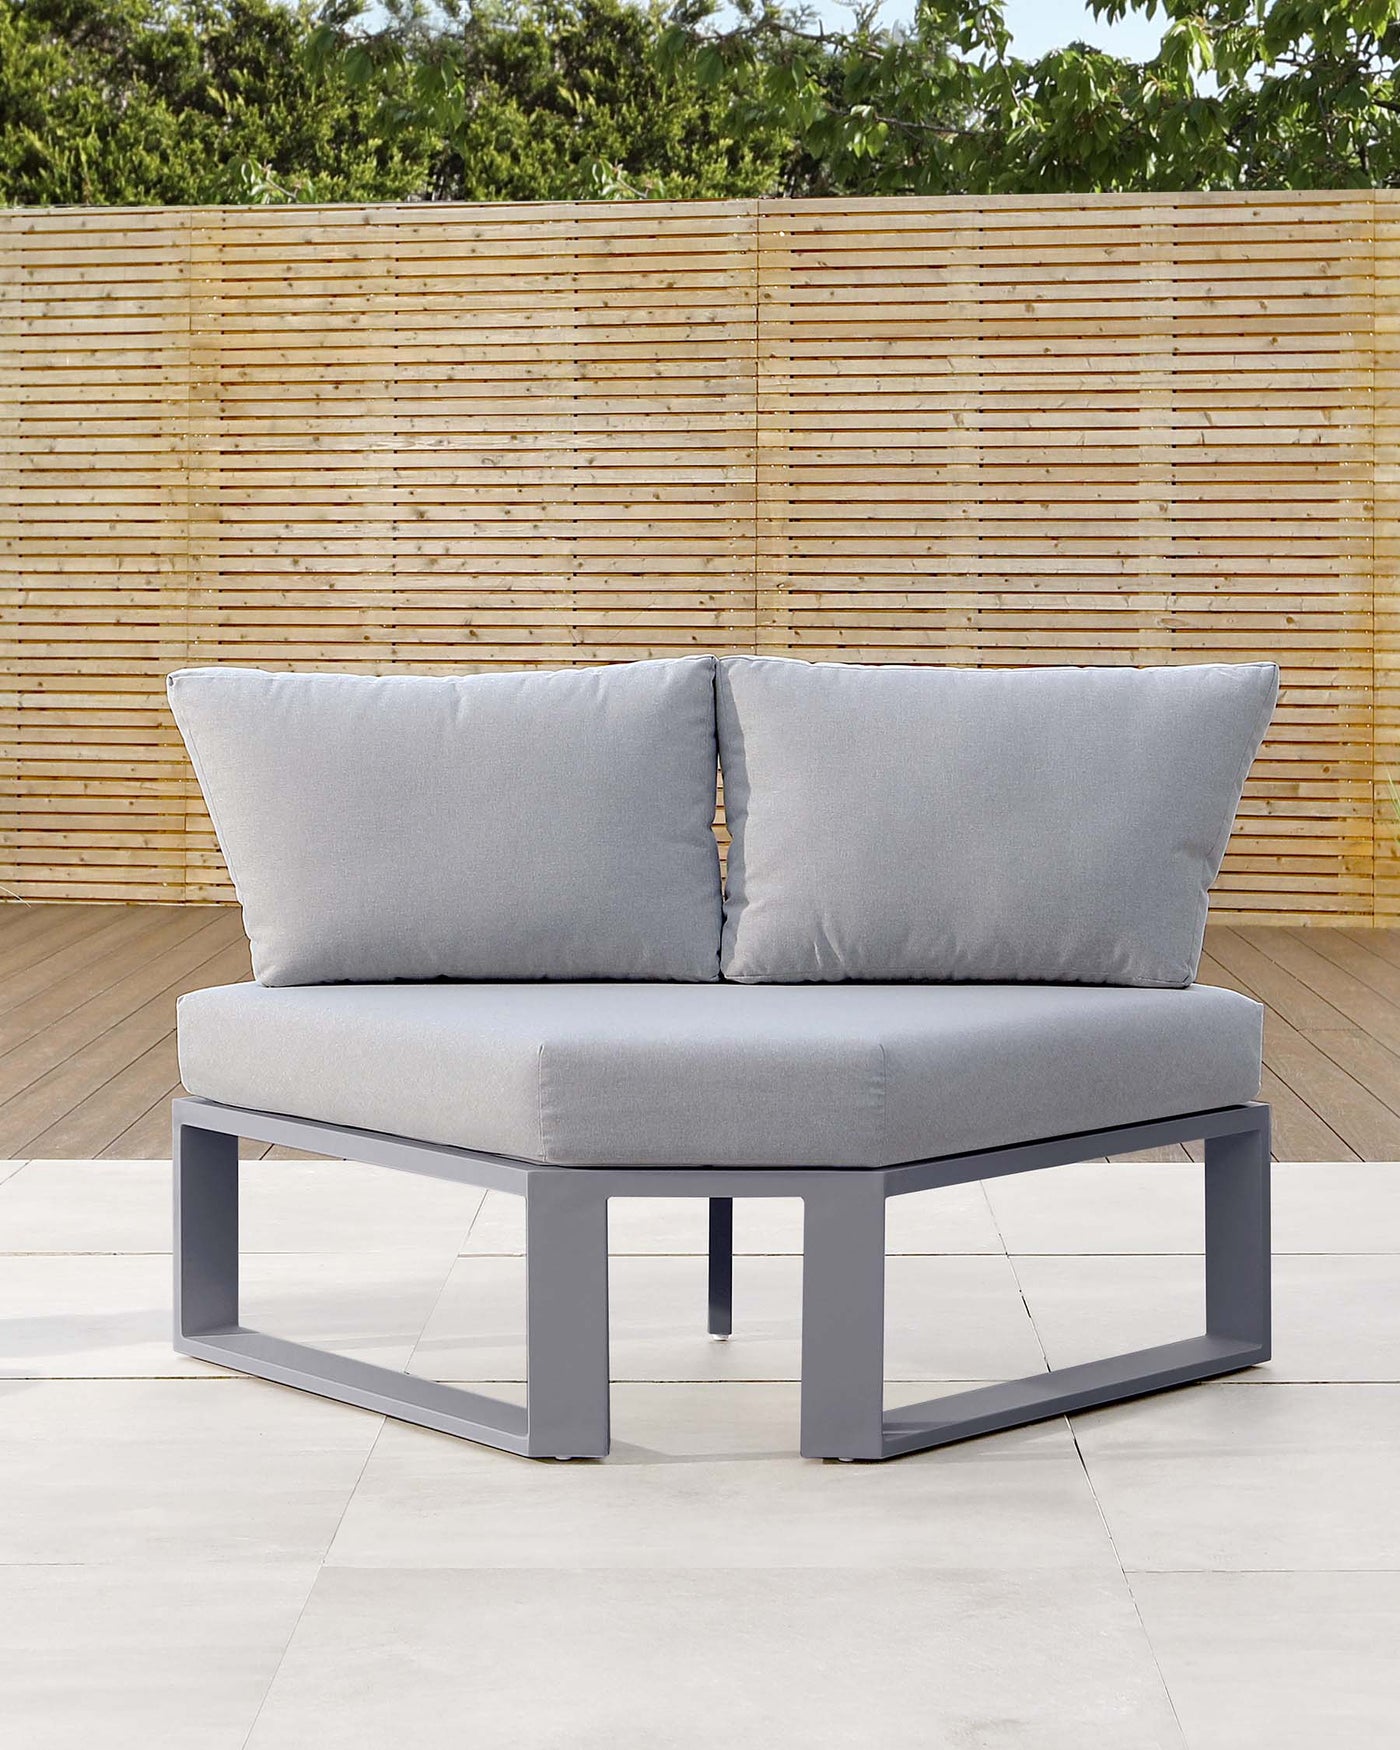 Modern outdoor loveseat with a sleek, grey metal frame and light grey cushions, featuring simple, clean lines and including two matching accent pillows, set against a natural bamboo fence backdrop.